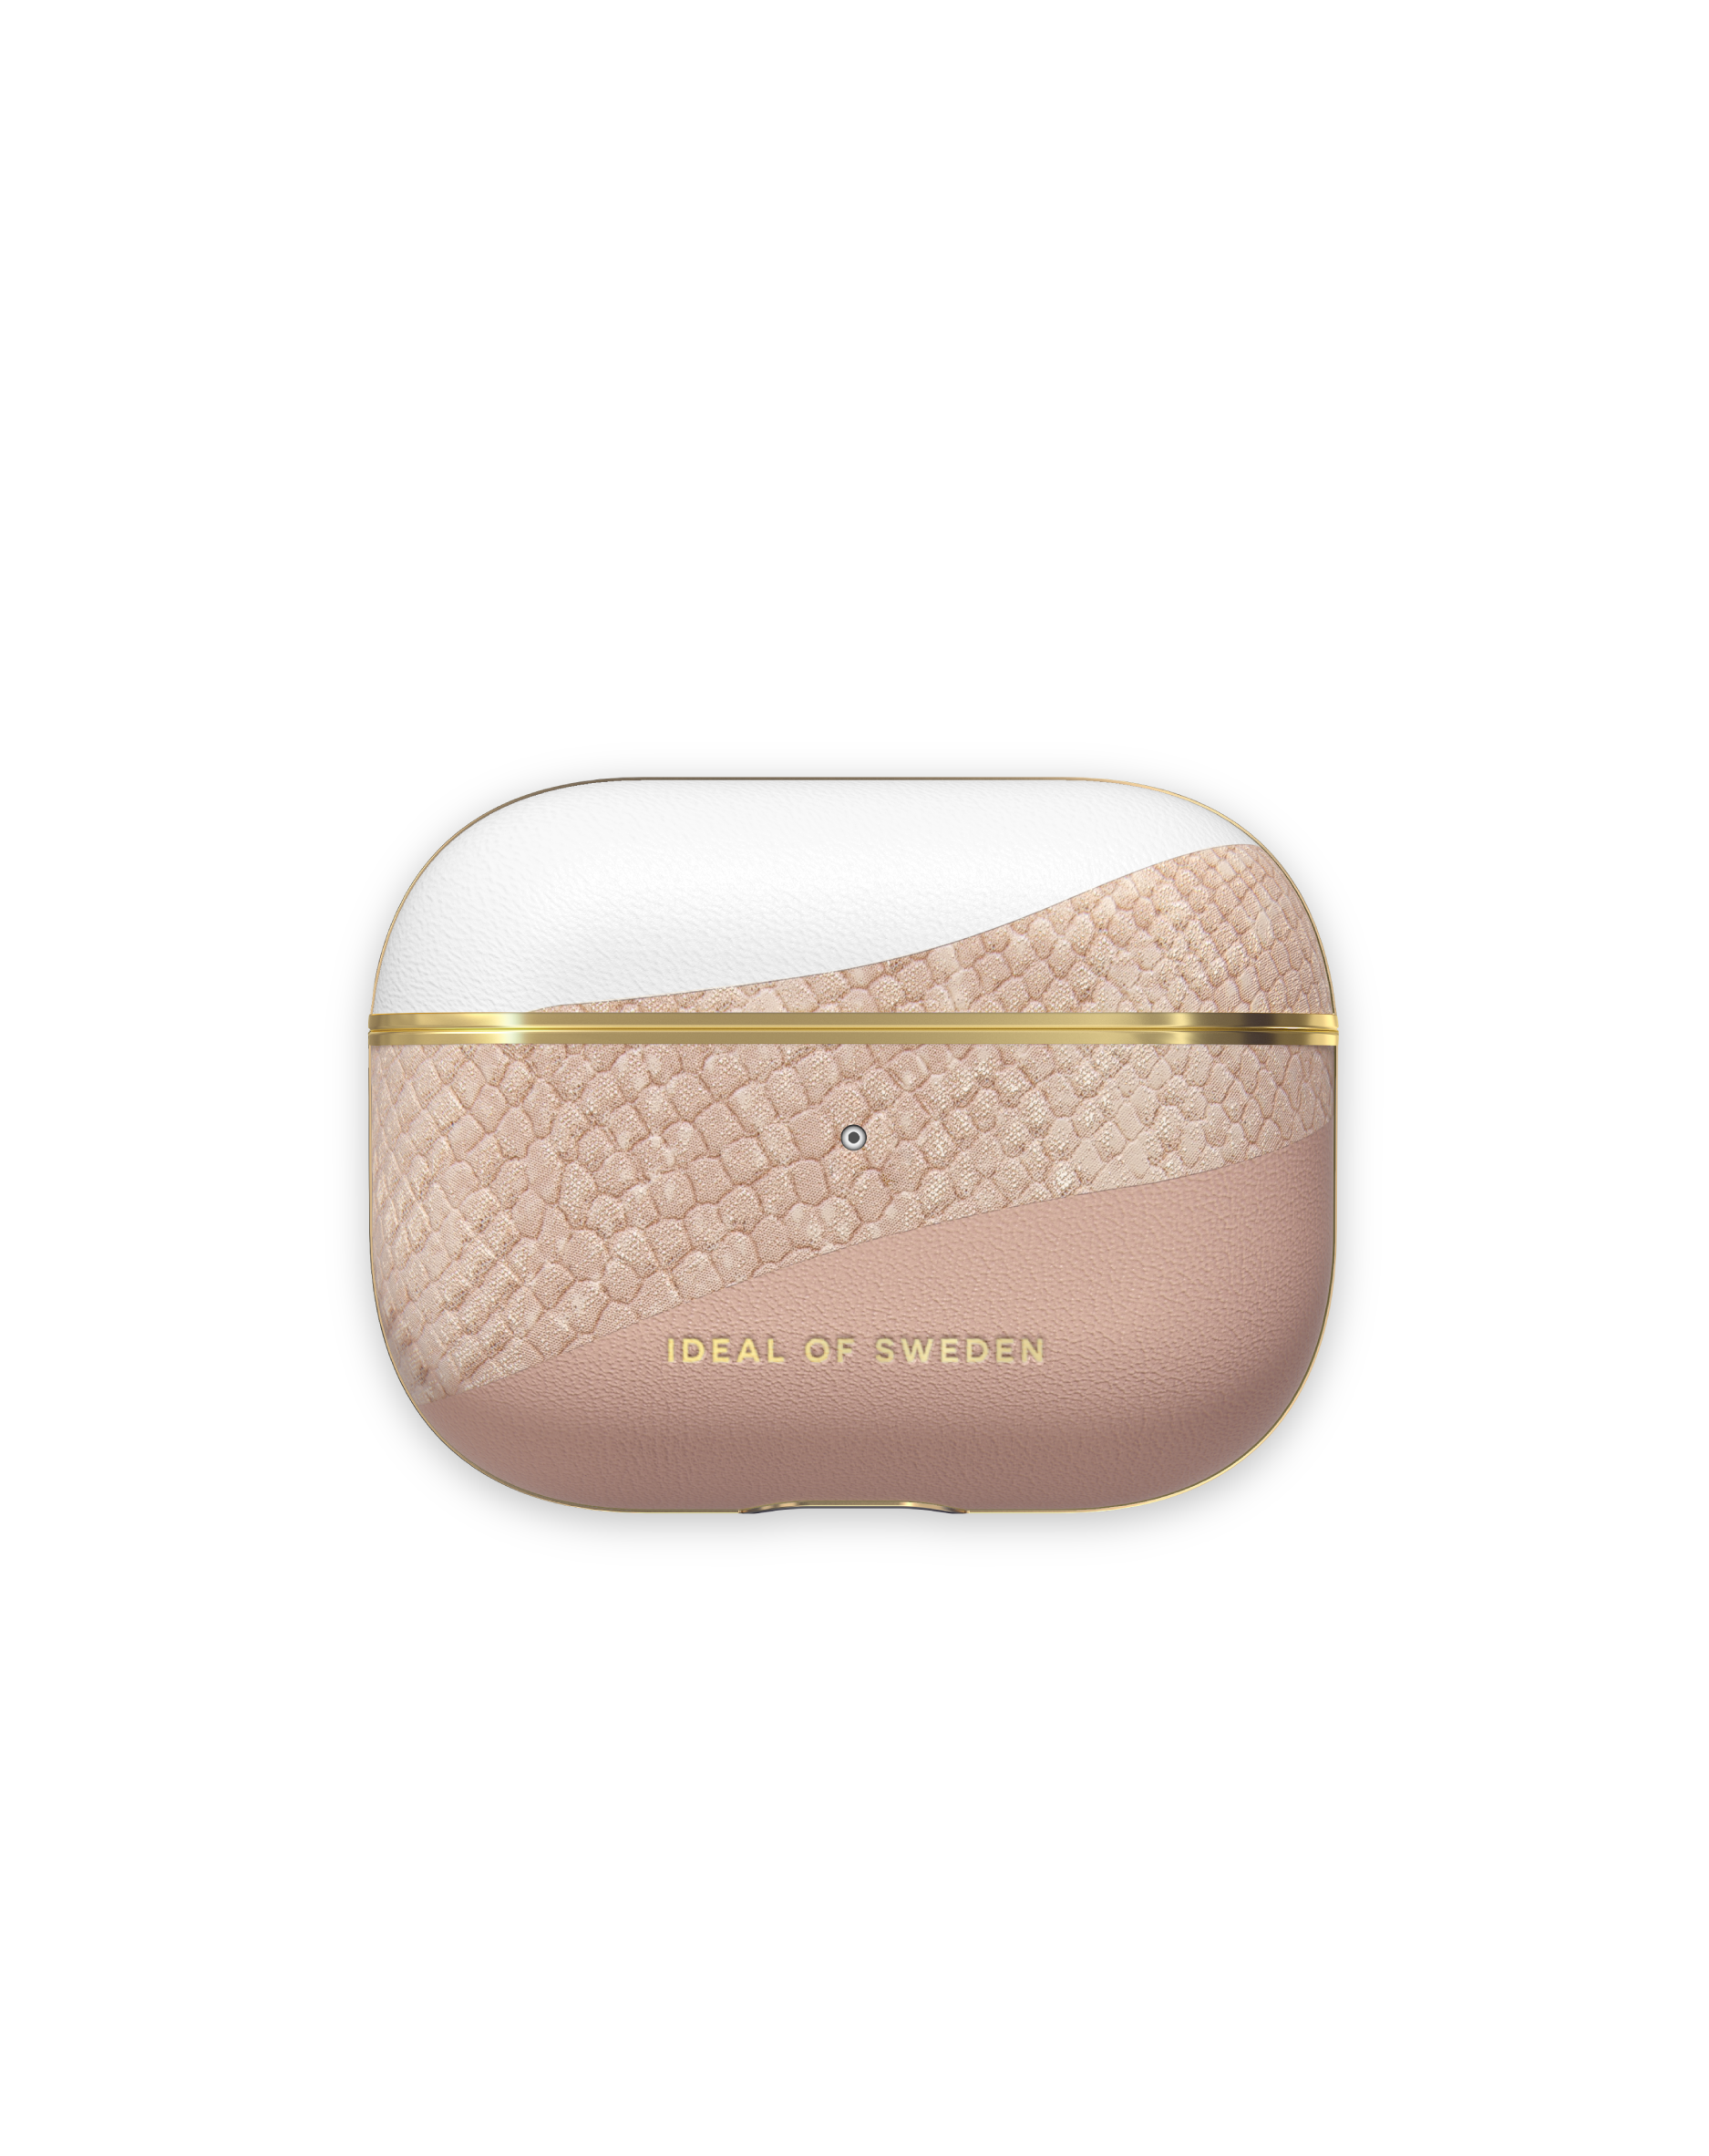 IDAPCSS21-PRO-269 Blush AirPod für: Cover Pink Full Apple OF passend SWEDEN IDEAL Snake Case